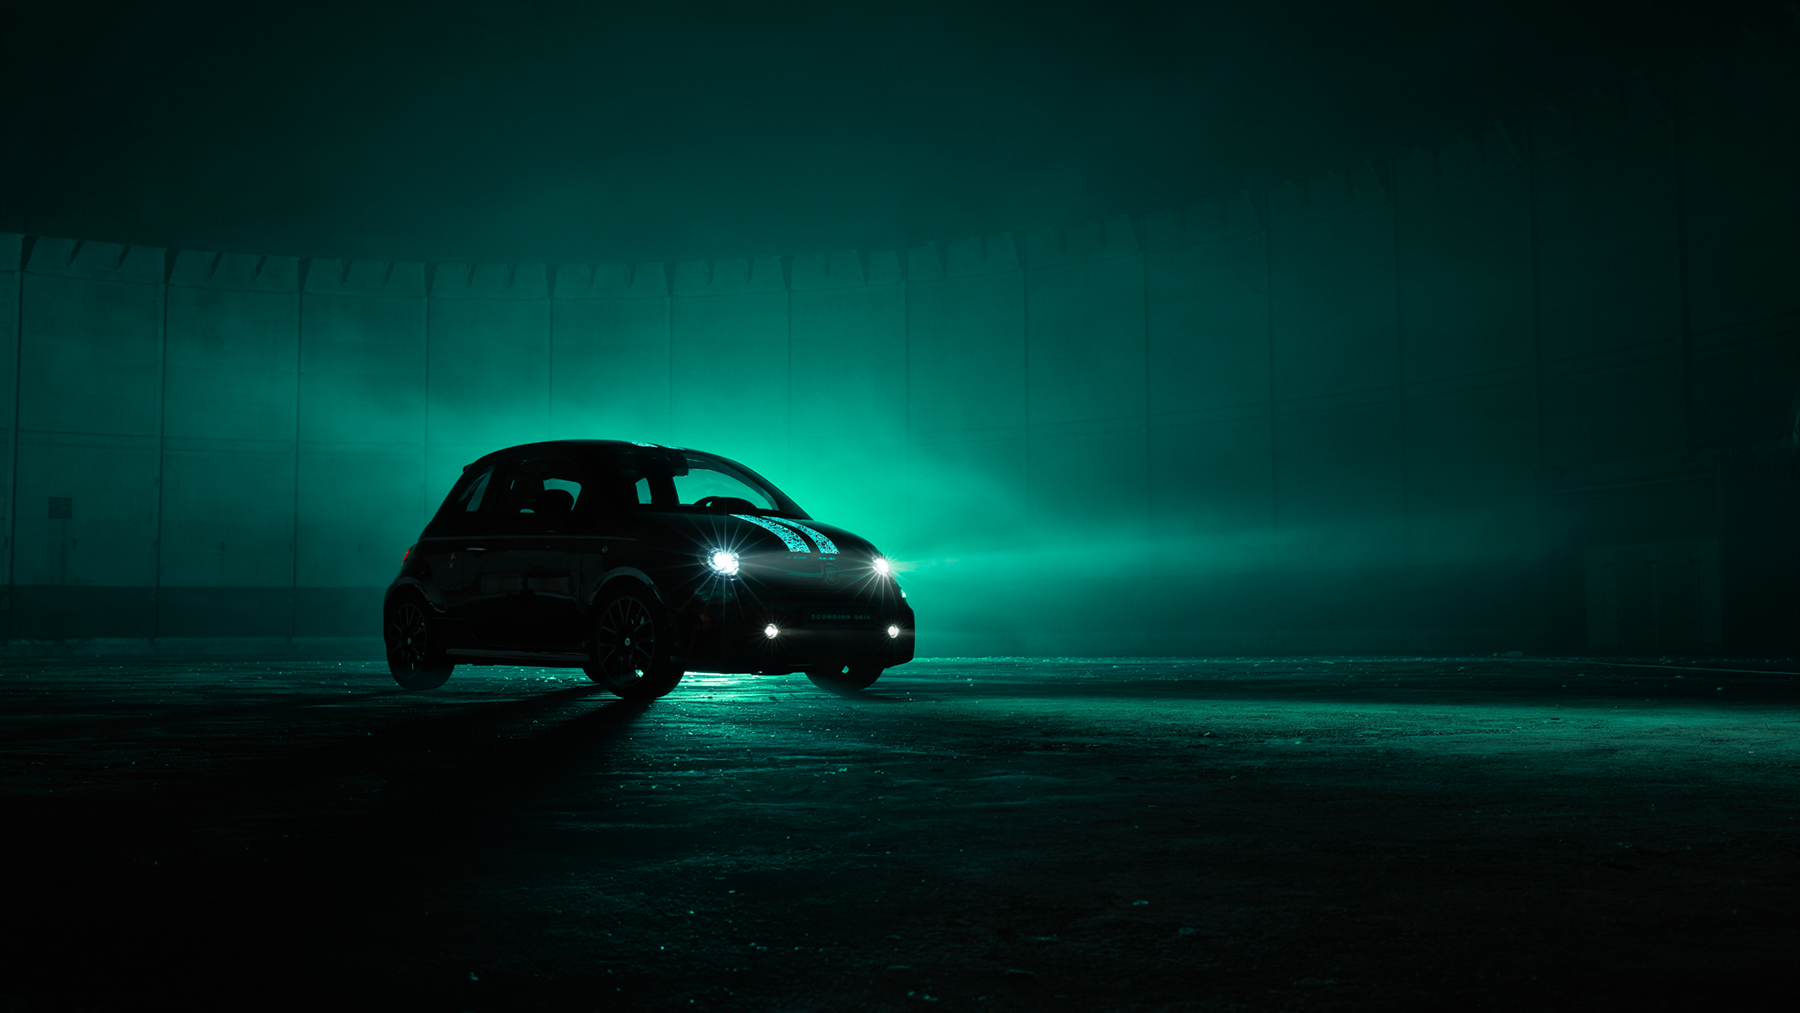 abarth shows one of a kind fiat 500 with scorpion skin paint glow v3 1l srgb 1800x1013px